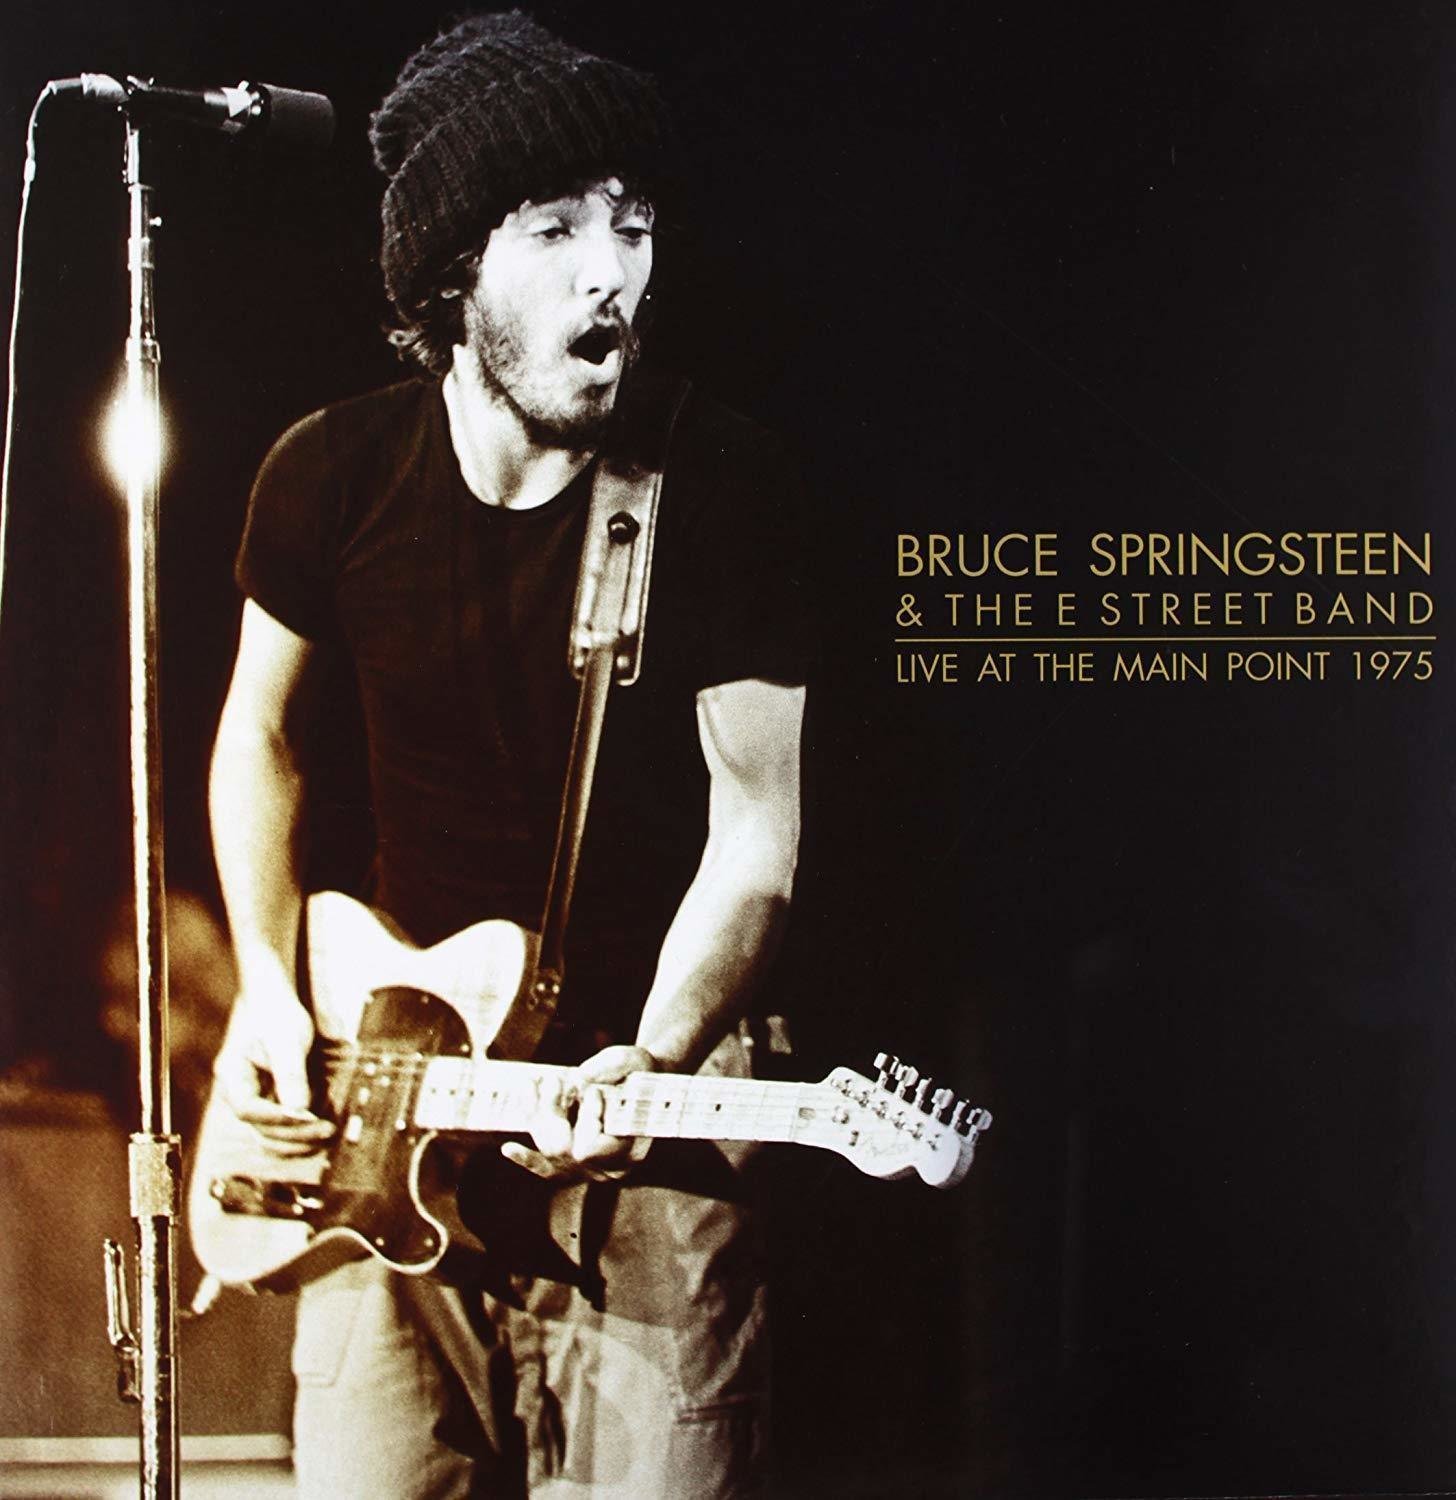 Vinyl Record Bruce Springsteen - Live At The Main Point 1975 (4 LP)